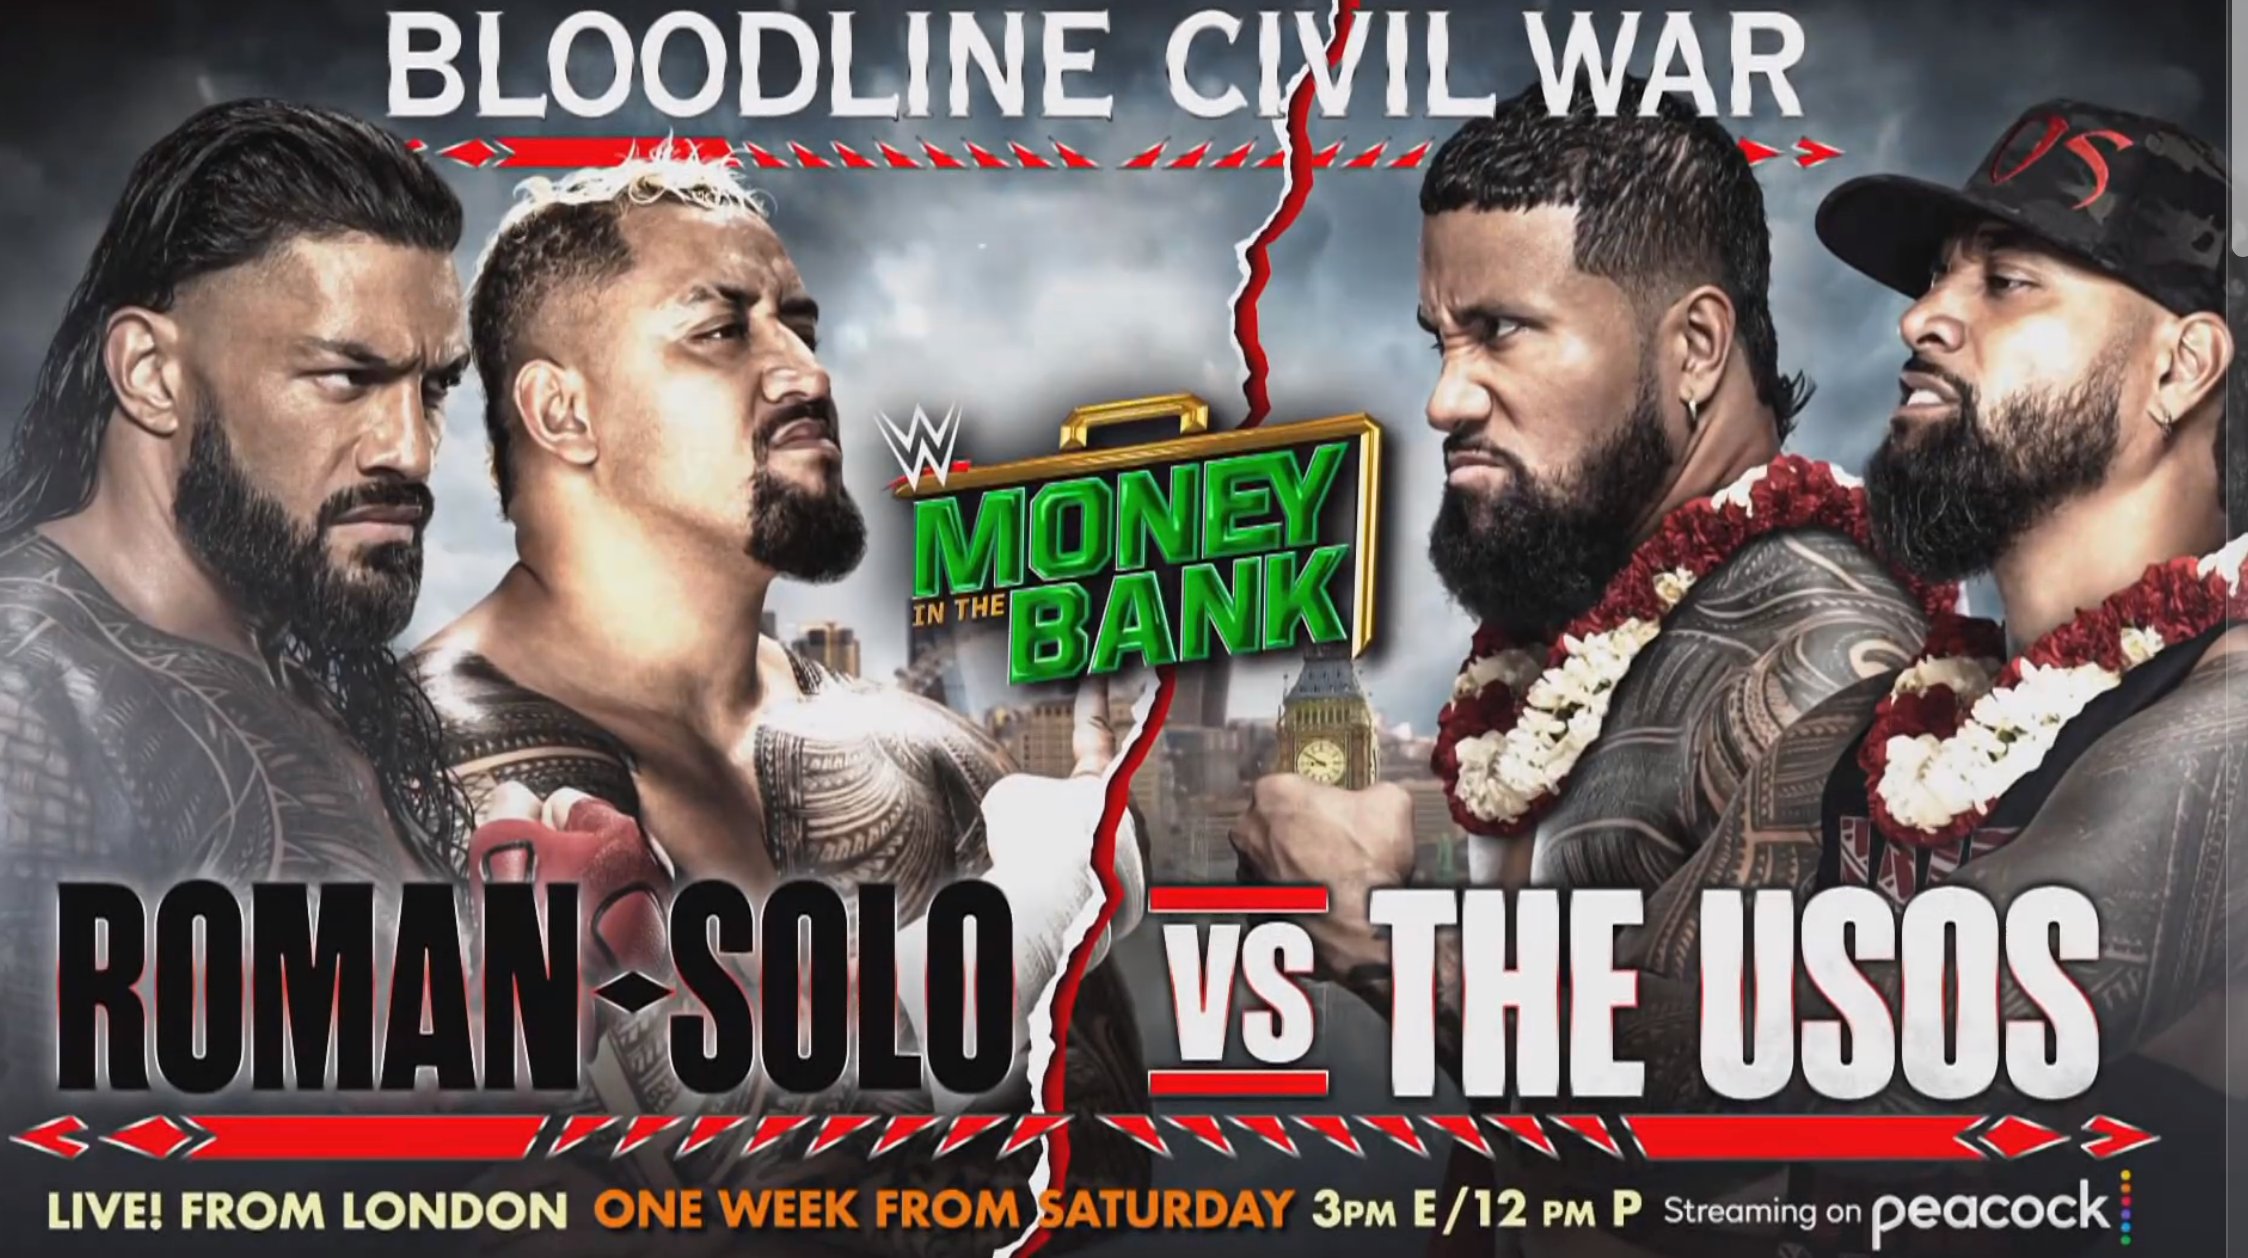 The Usos put in the work ahead of “all reaction” Bloodline Civil War at